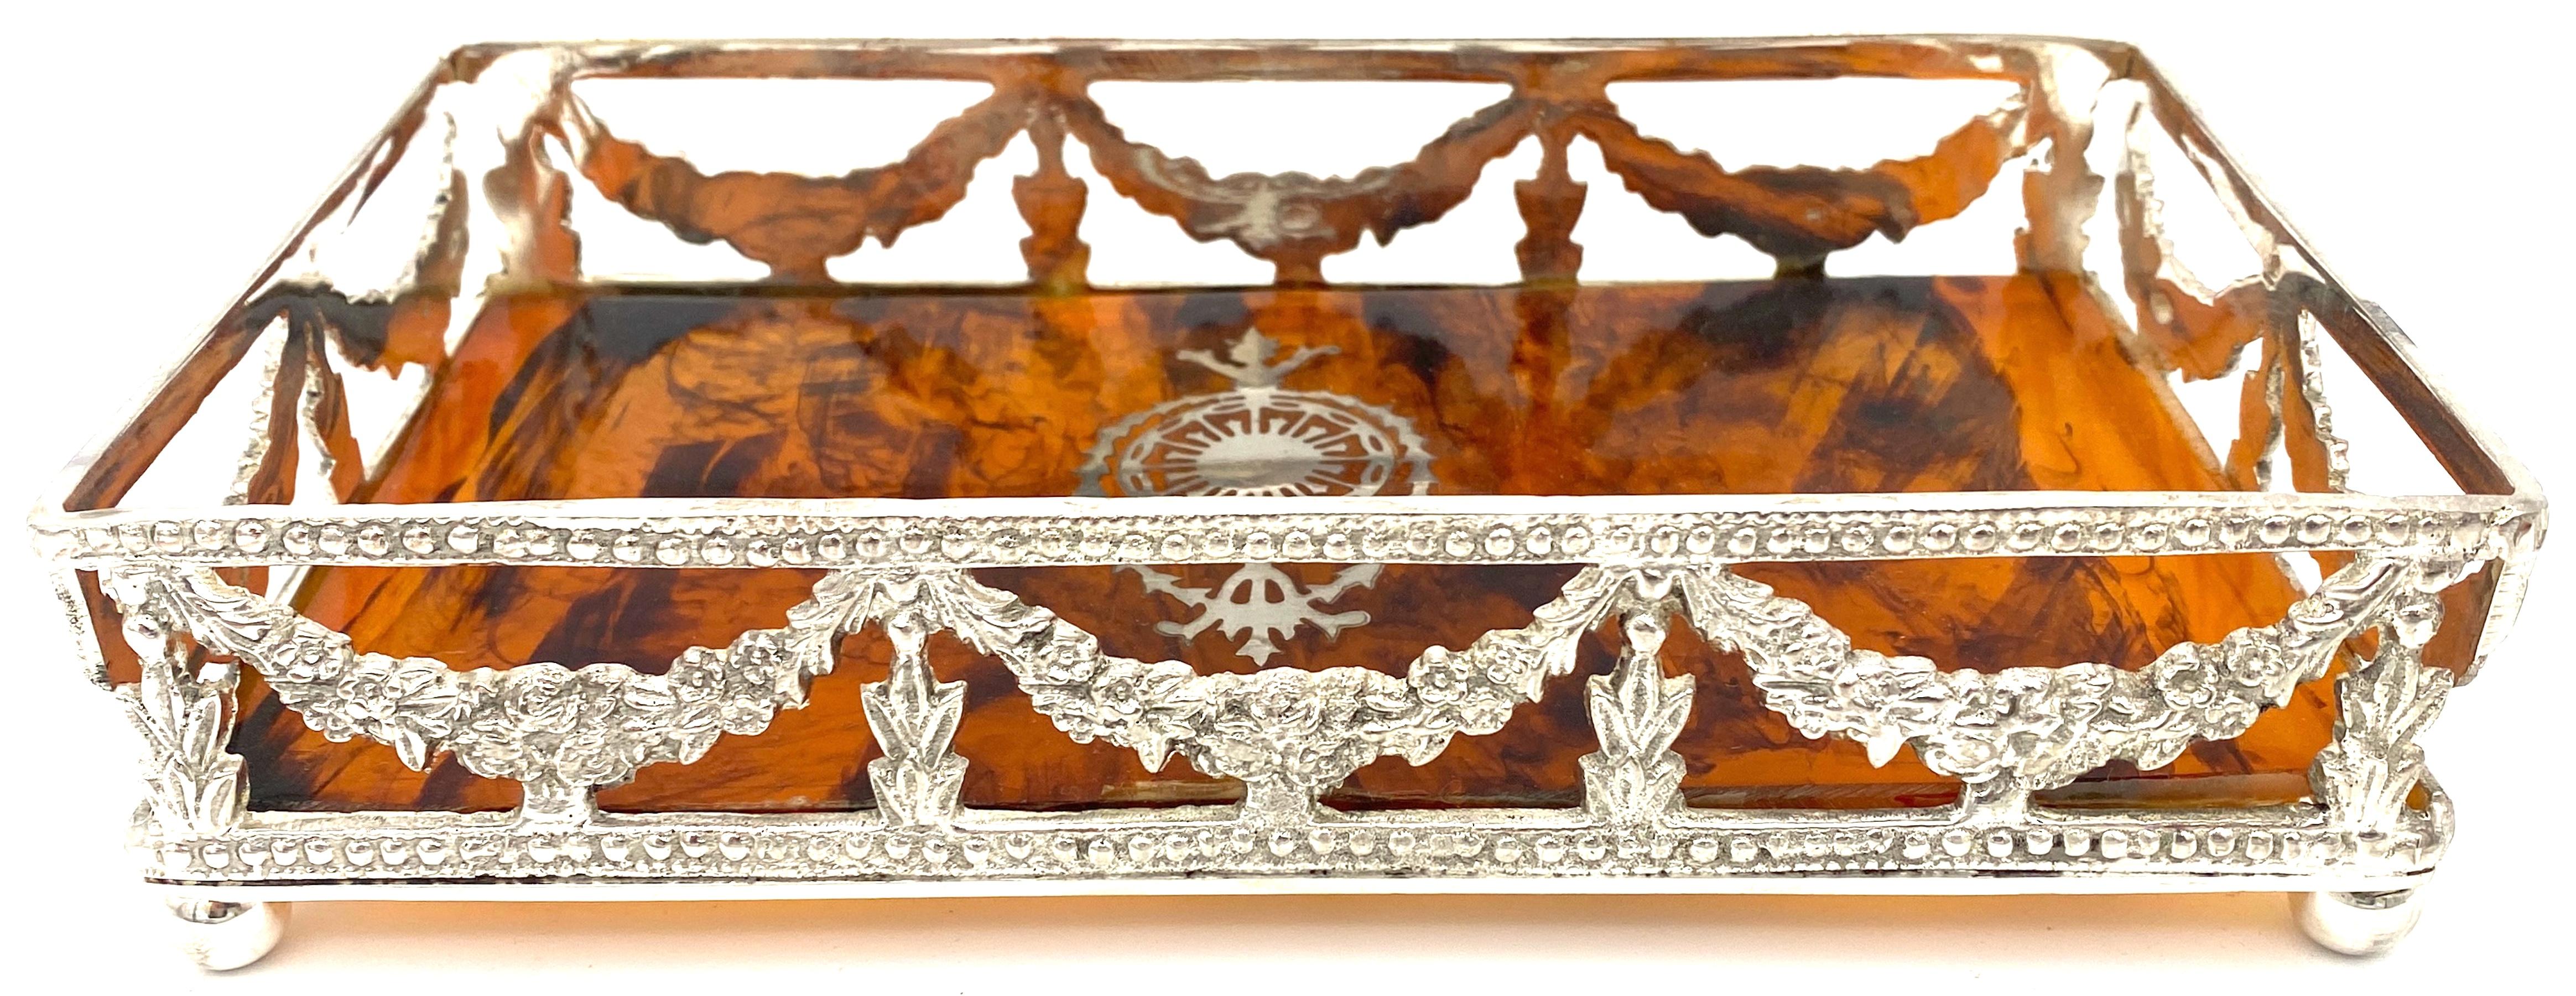 English Diminutive Neoclassical Silverplated & Faux Tortoise Gallery Tray, 2nd Available 
England, Late 20th Century

A English Diminutive Neoclassical Silverplated & Faux Tortoise Gallery Tray, a late 20th-century beauty. This stunning rectangular